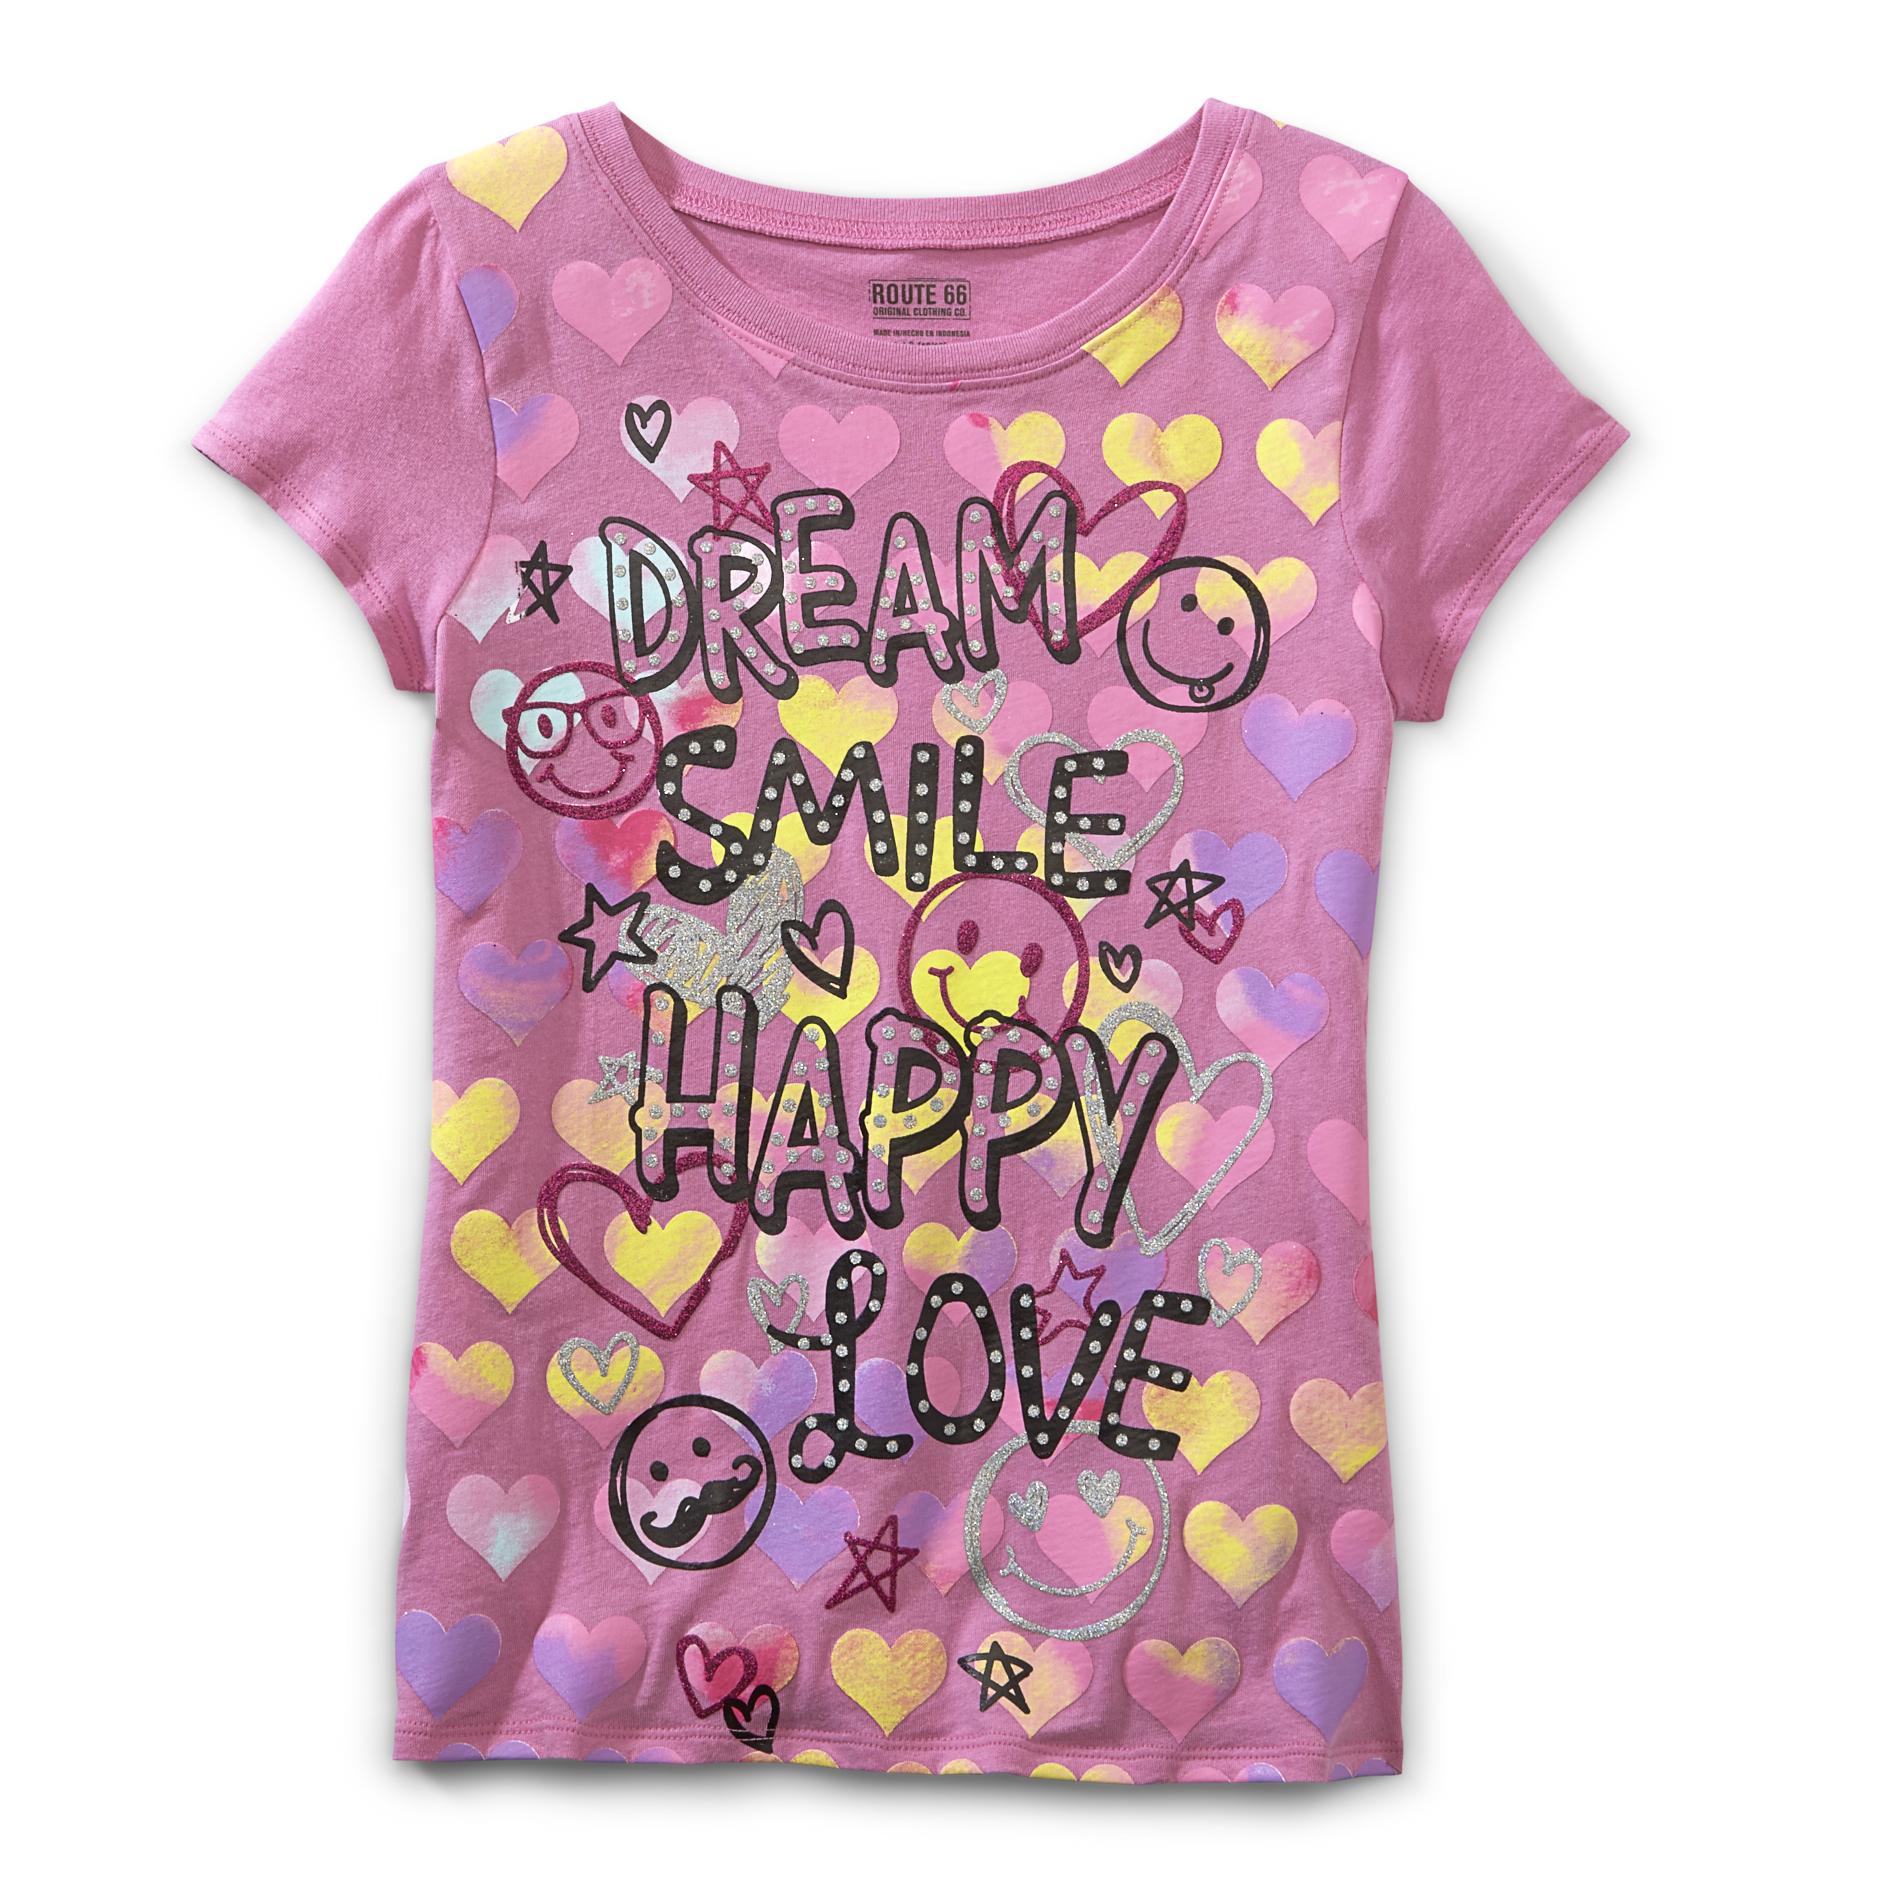 Route 66 Girl's Graphic T-Shirt - Dream Smile Happy Love